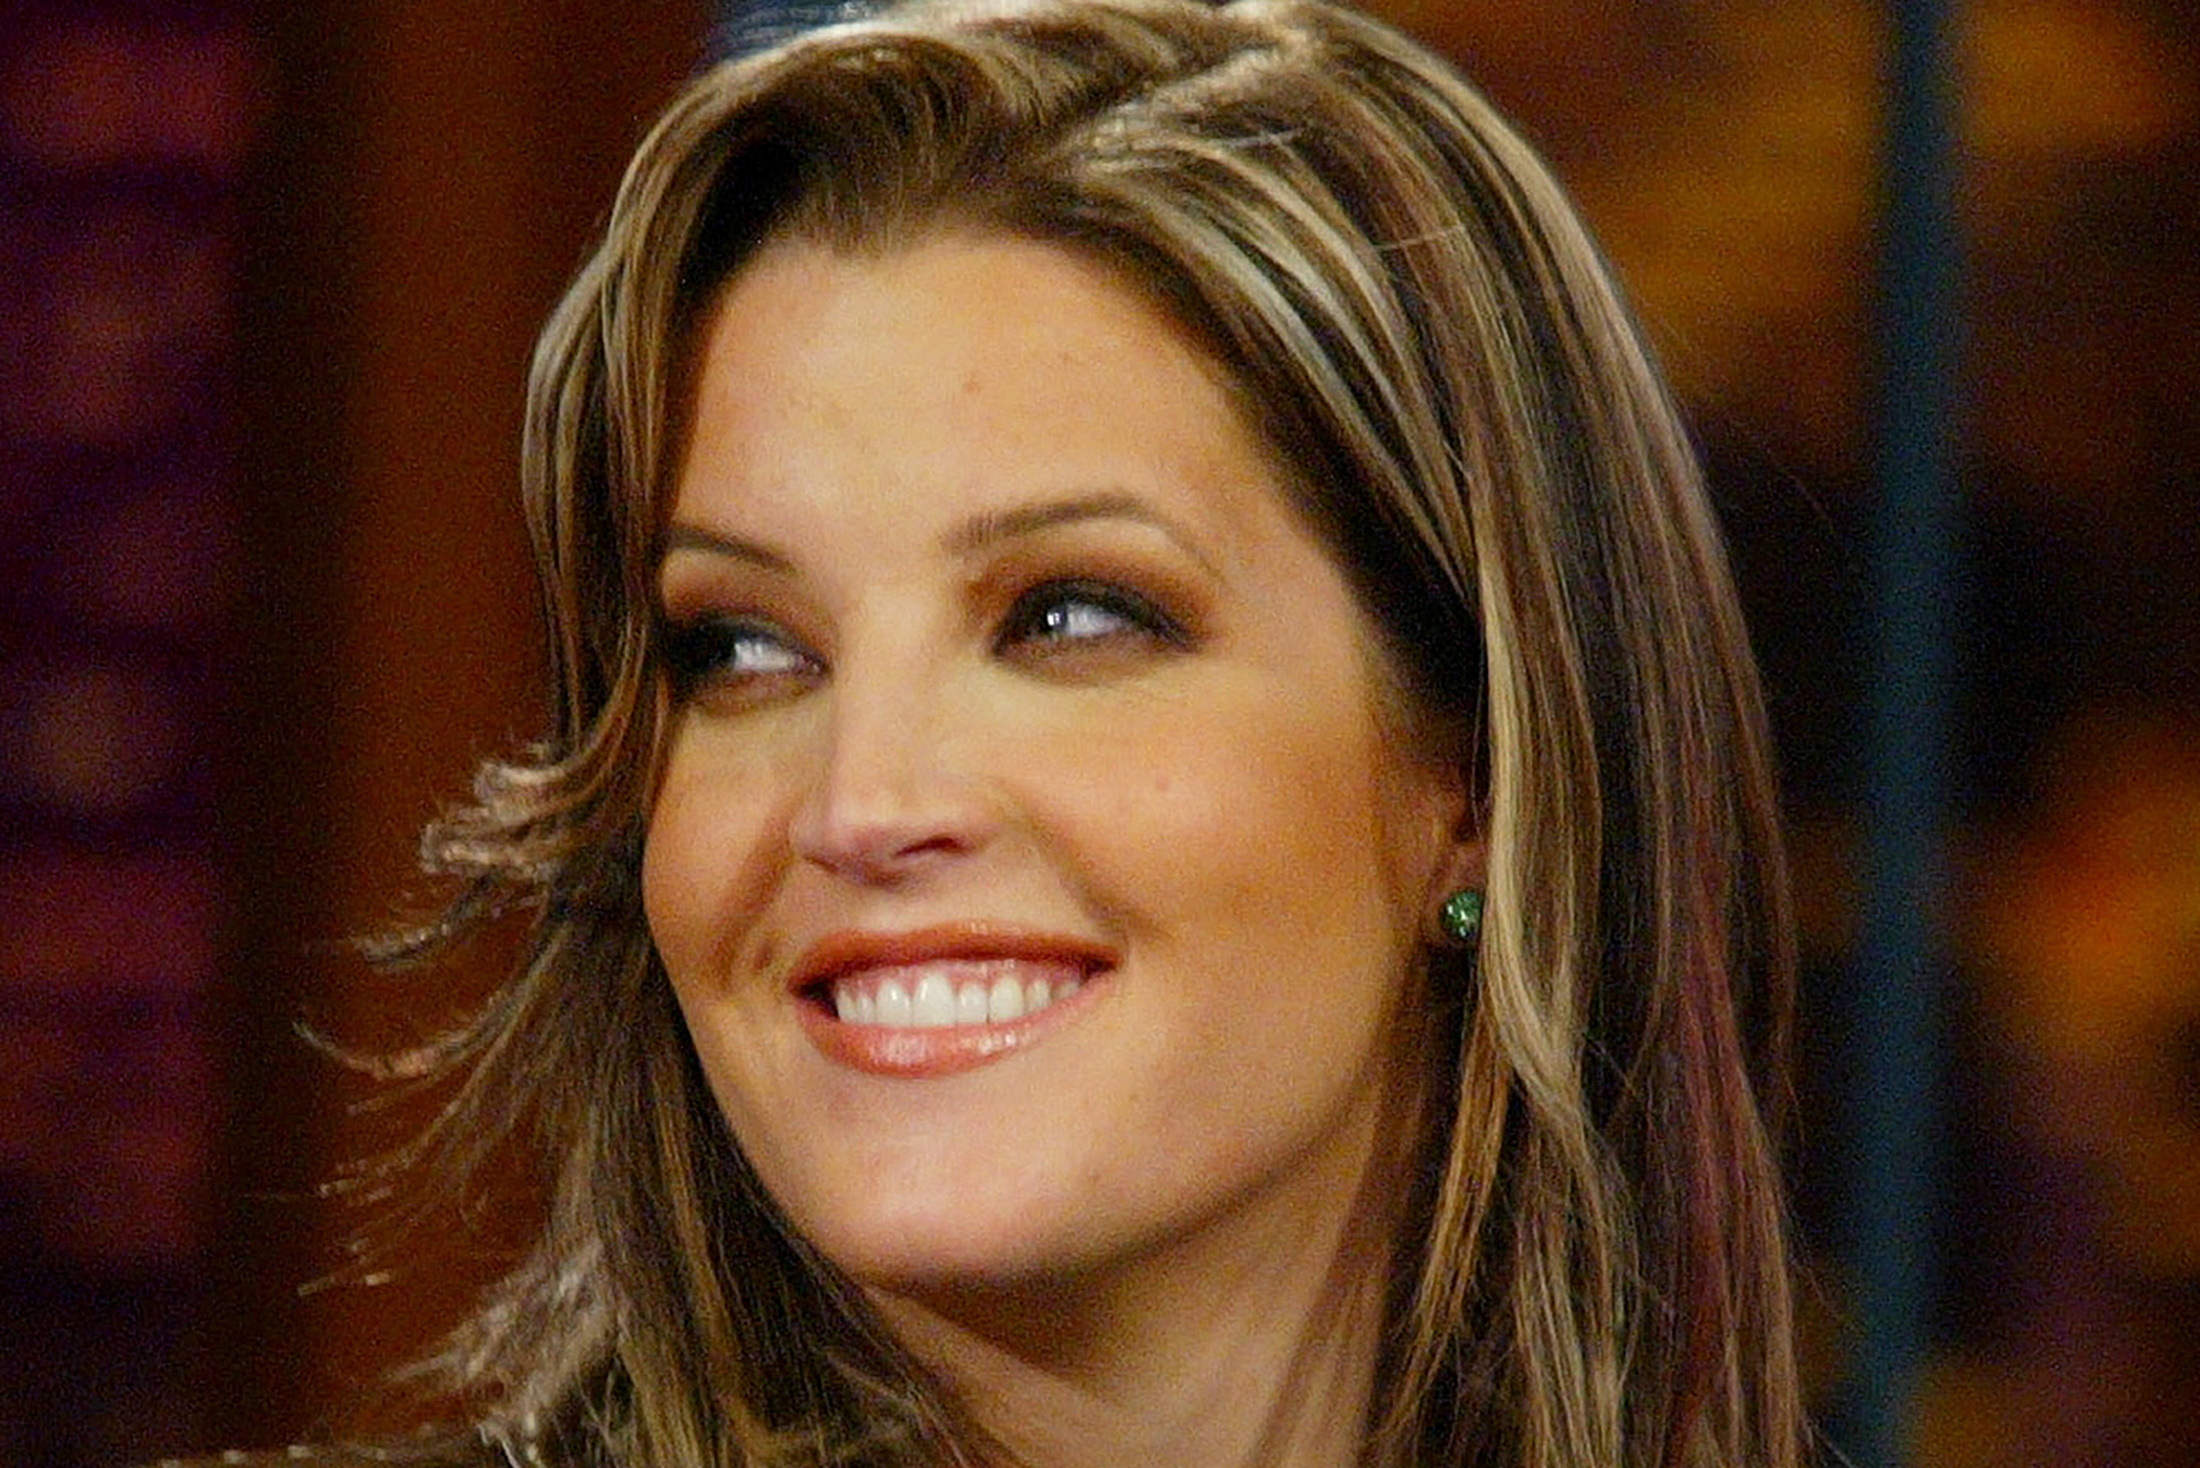 Singer Lisa Marie Presley makes a guest appearance 